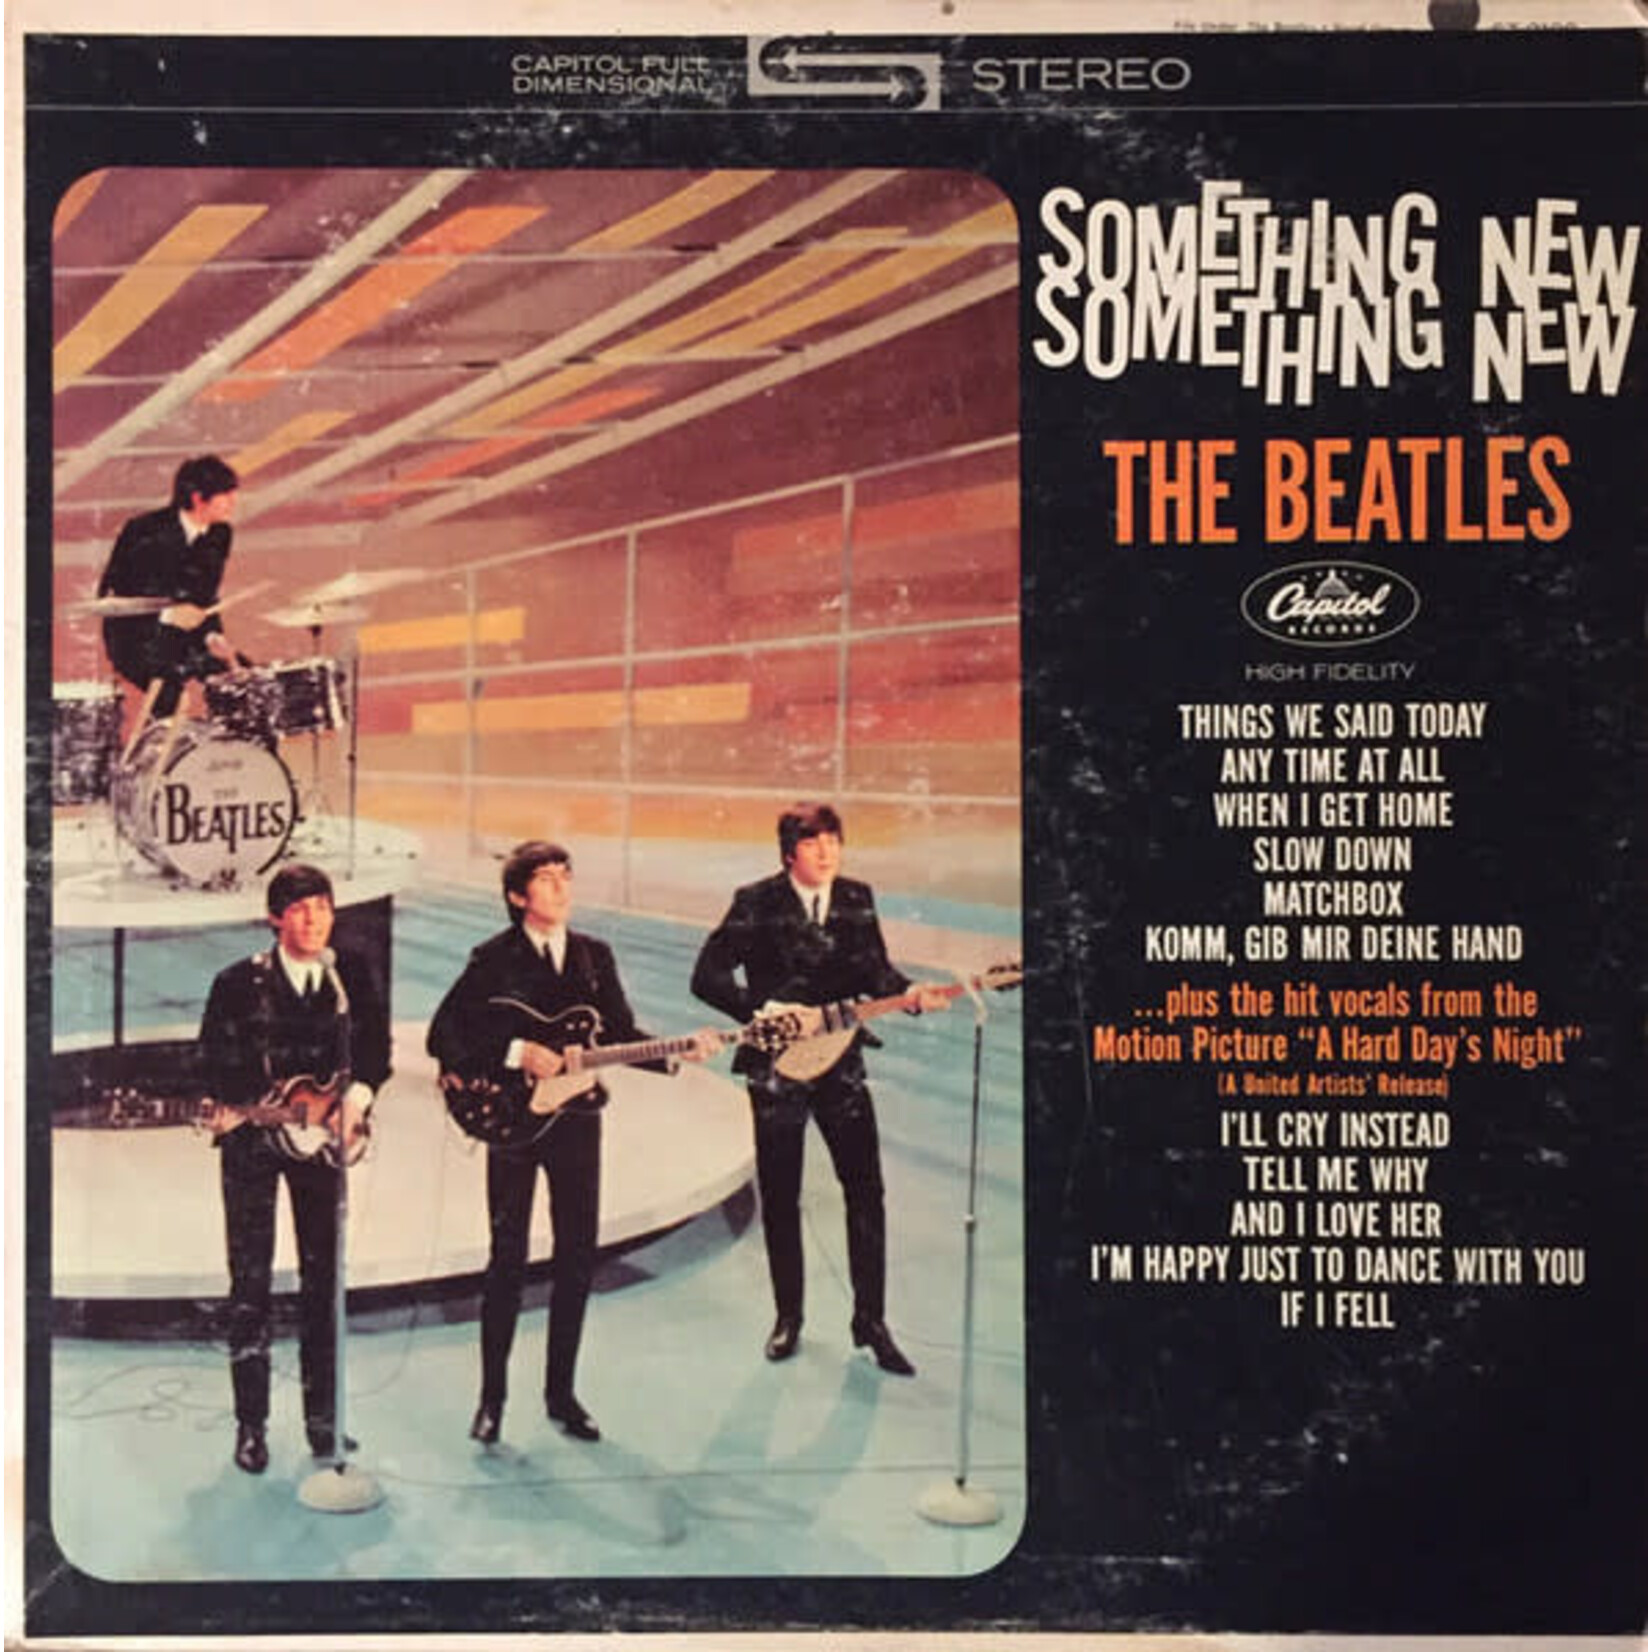 The Beatles The Beatles – Something New (G+, 1968, LP, Stereo, Reissue, Capitol Records – ST-2108) SCAZ